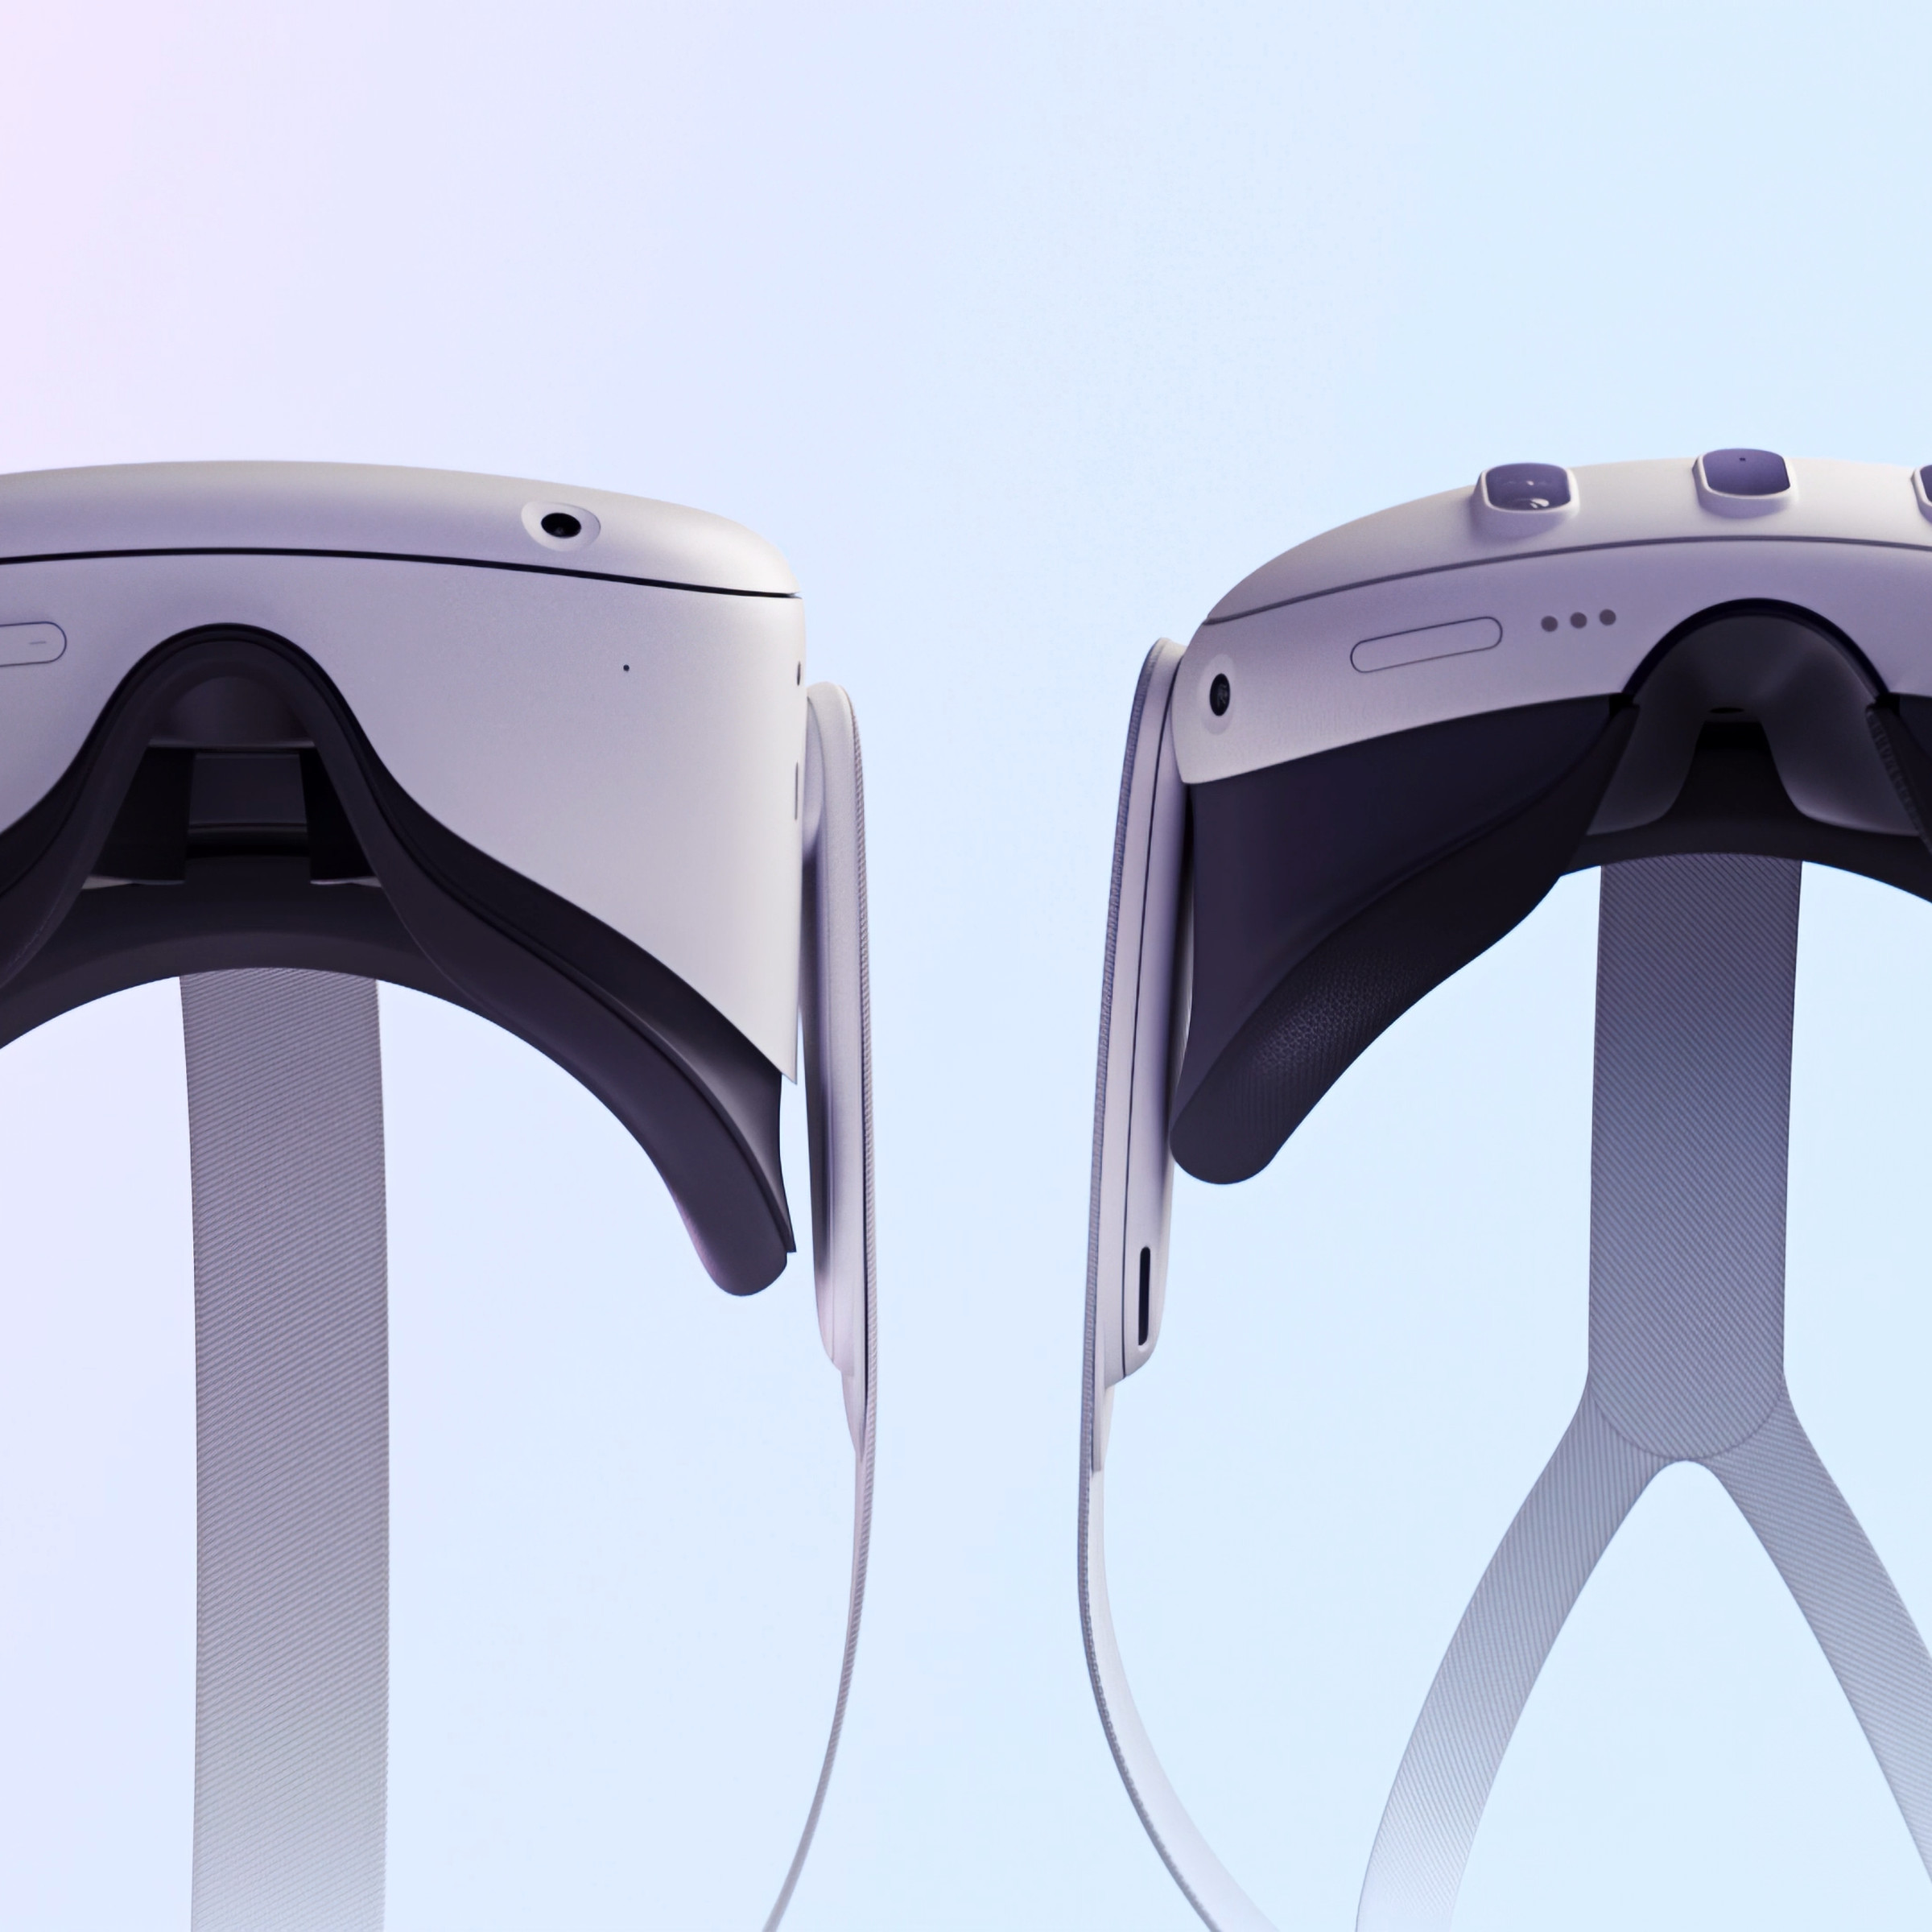 Side-by-side view from the bottom of both the Meta Quest 2 and Quest 3 headsets showing the new version’s slimmer design.